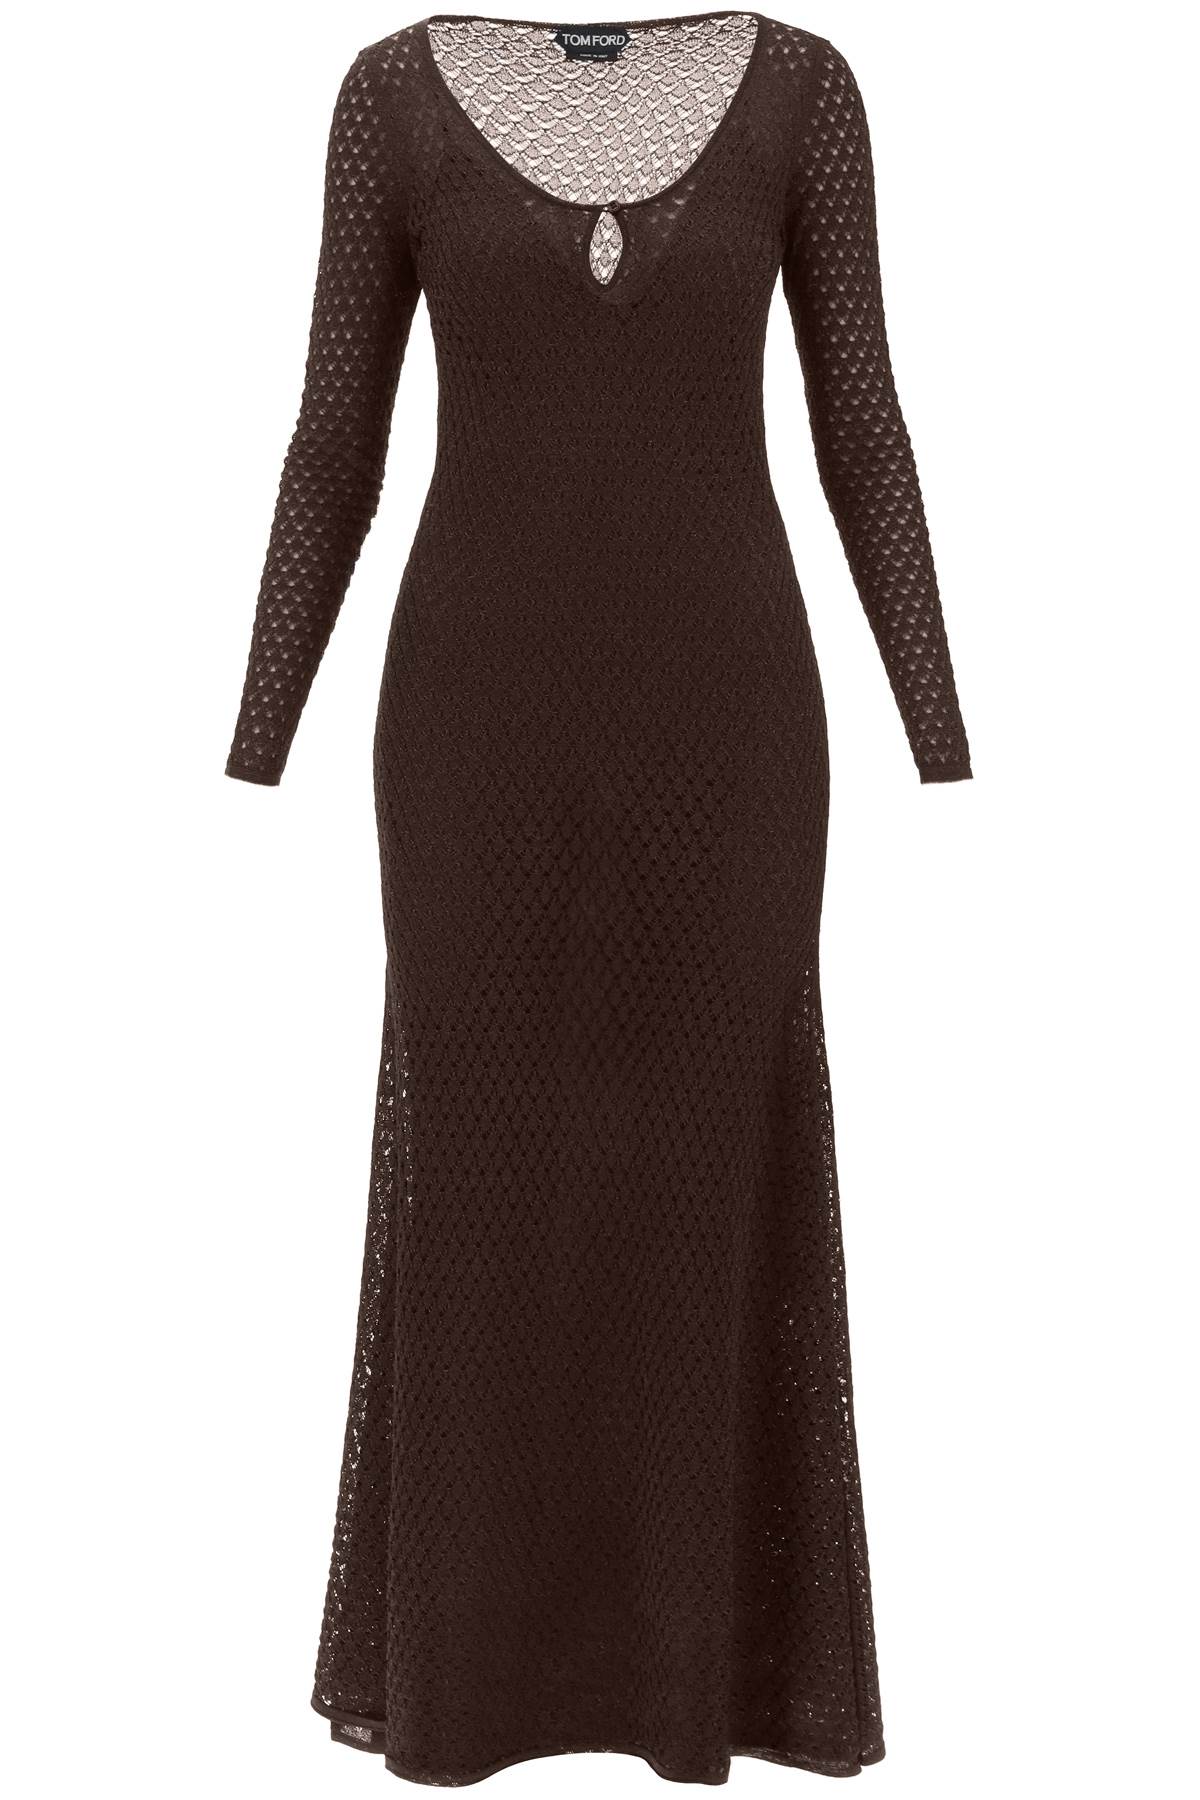 Tom ford long knitted lurex perforated dress ACK416 YAX648 CHOCOLATE BROWN